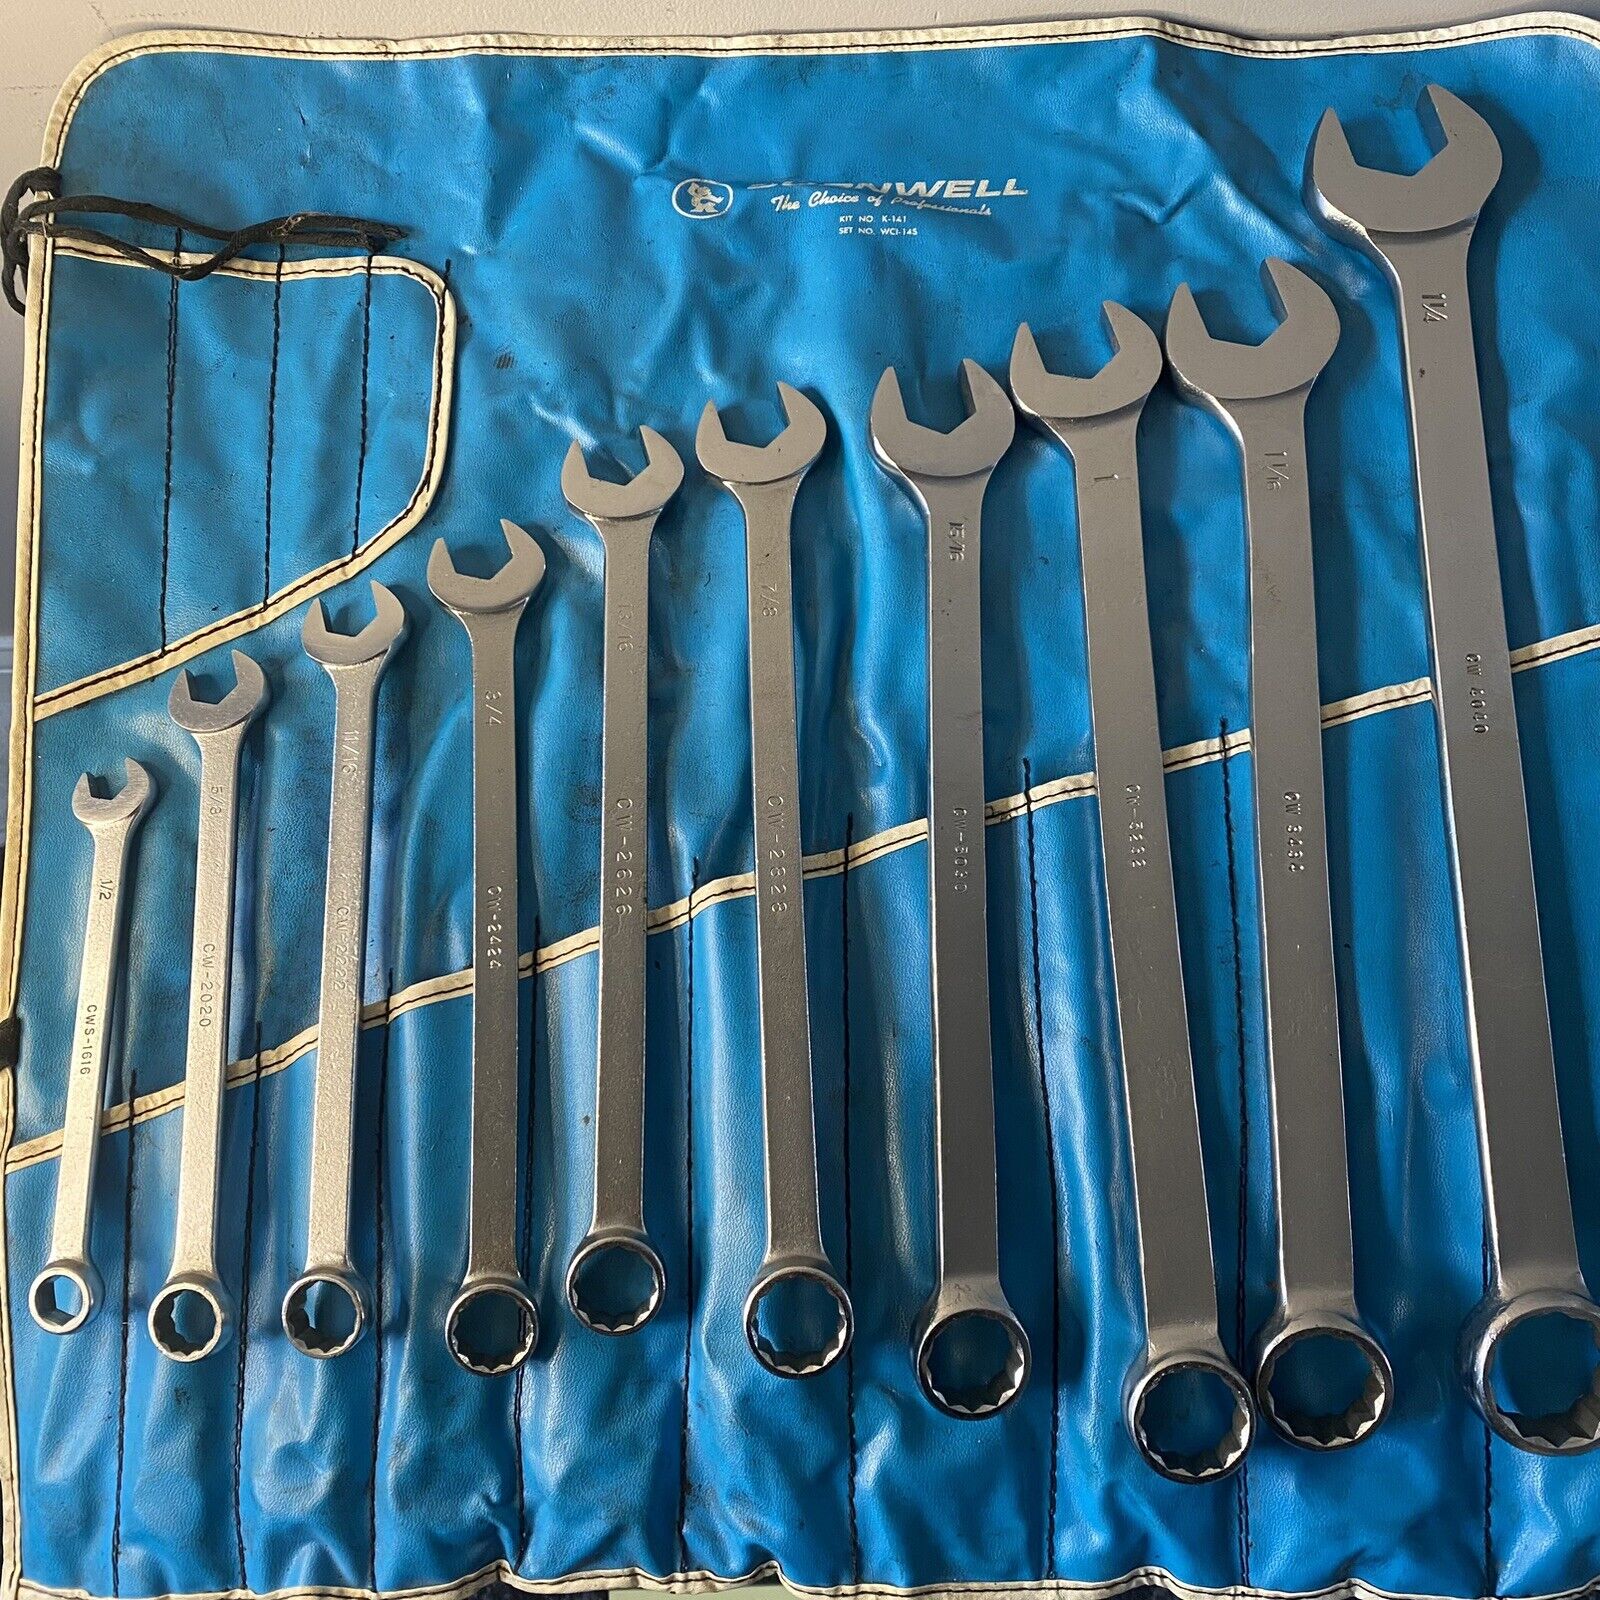 VTG Cornwell Lage Wrenches Set Of 10 Pc 1/2-1 1/16 USA 12 Point, 1/2 Is 6 Point